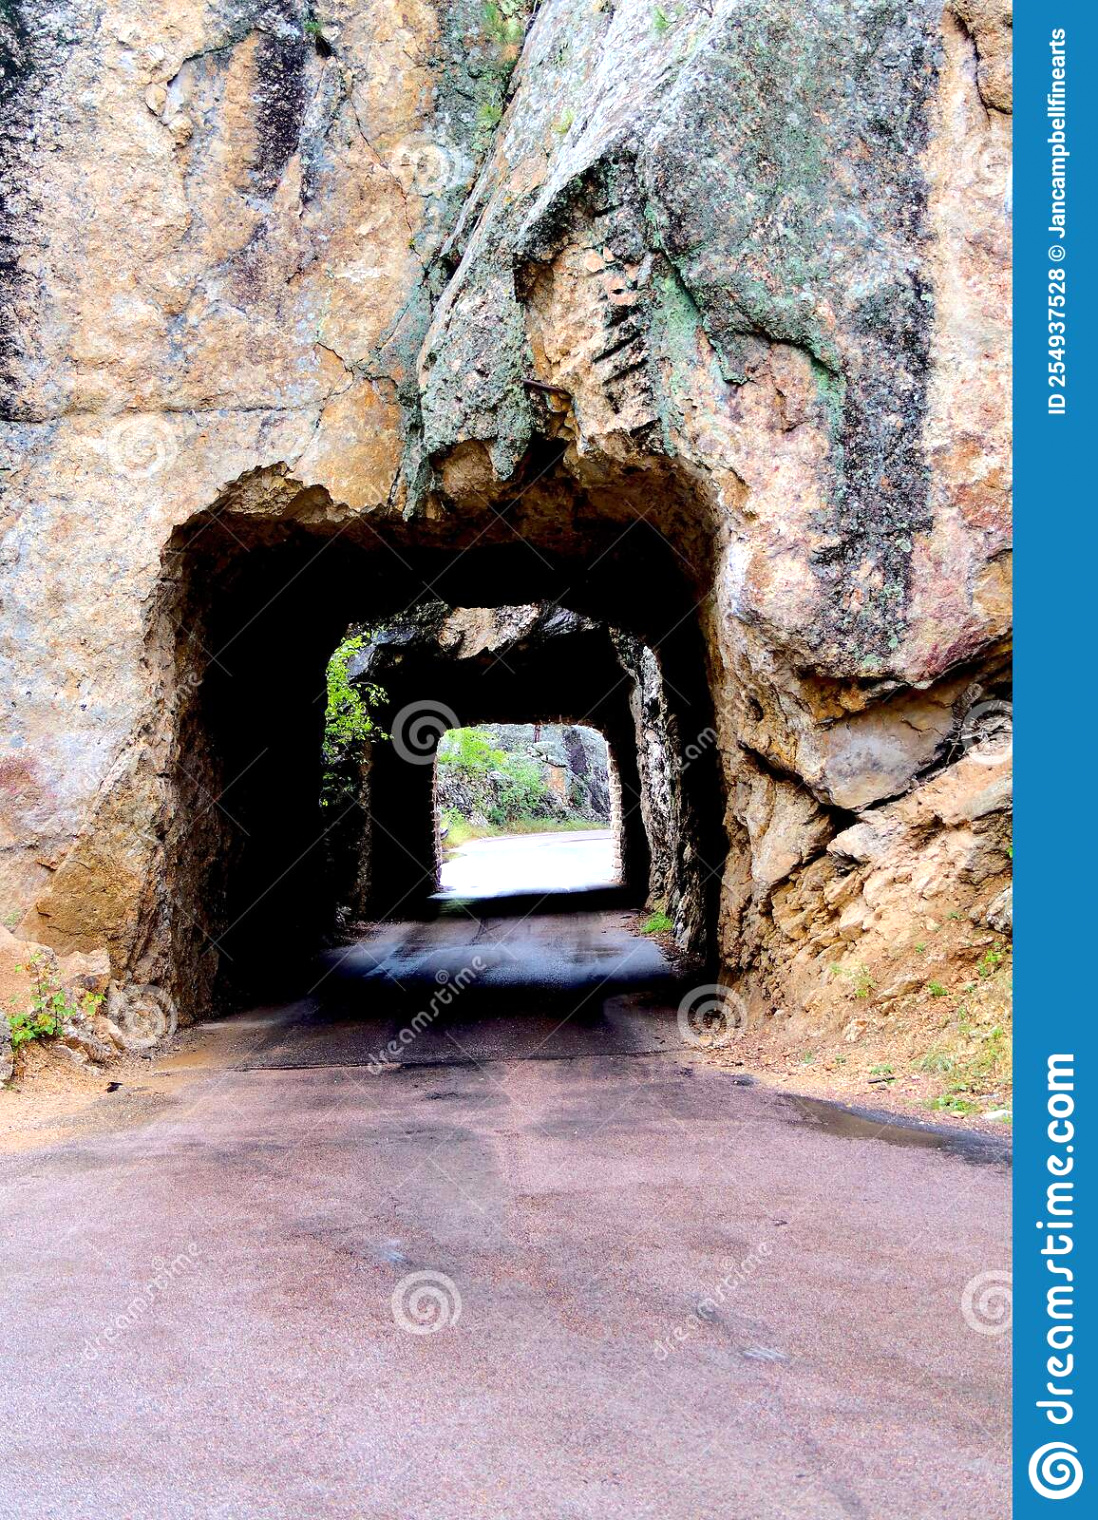 Cheap Vpn In Granite Mt Dans 667 Double Tunnel Photos - Free & Royalty-free Stock Photos From ...